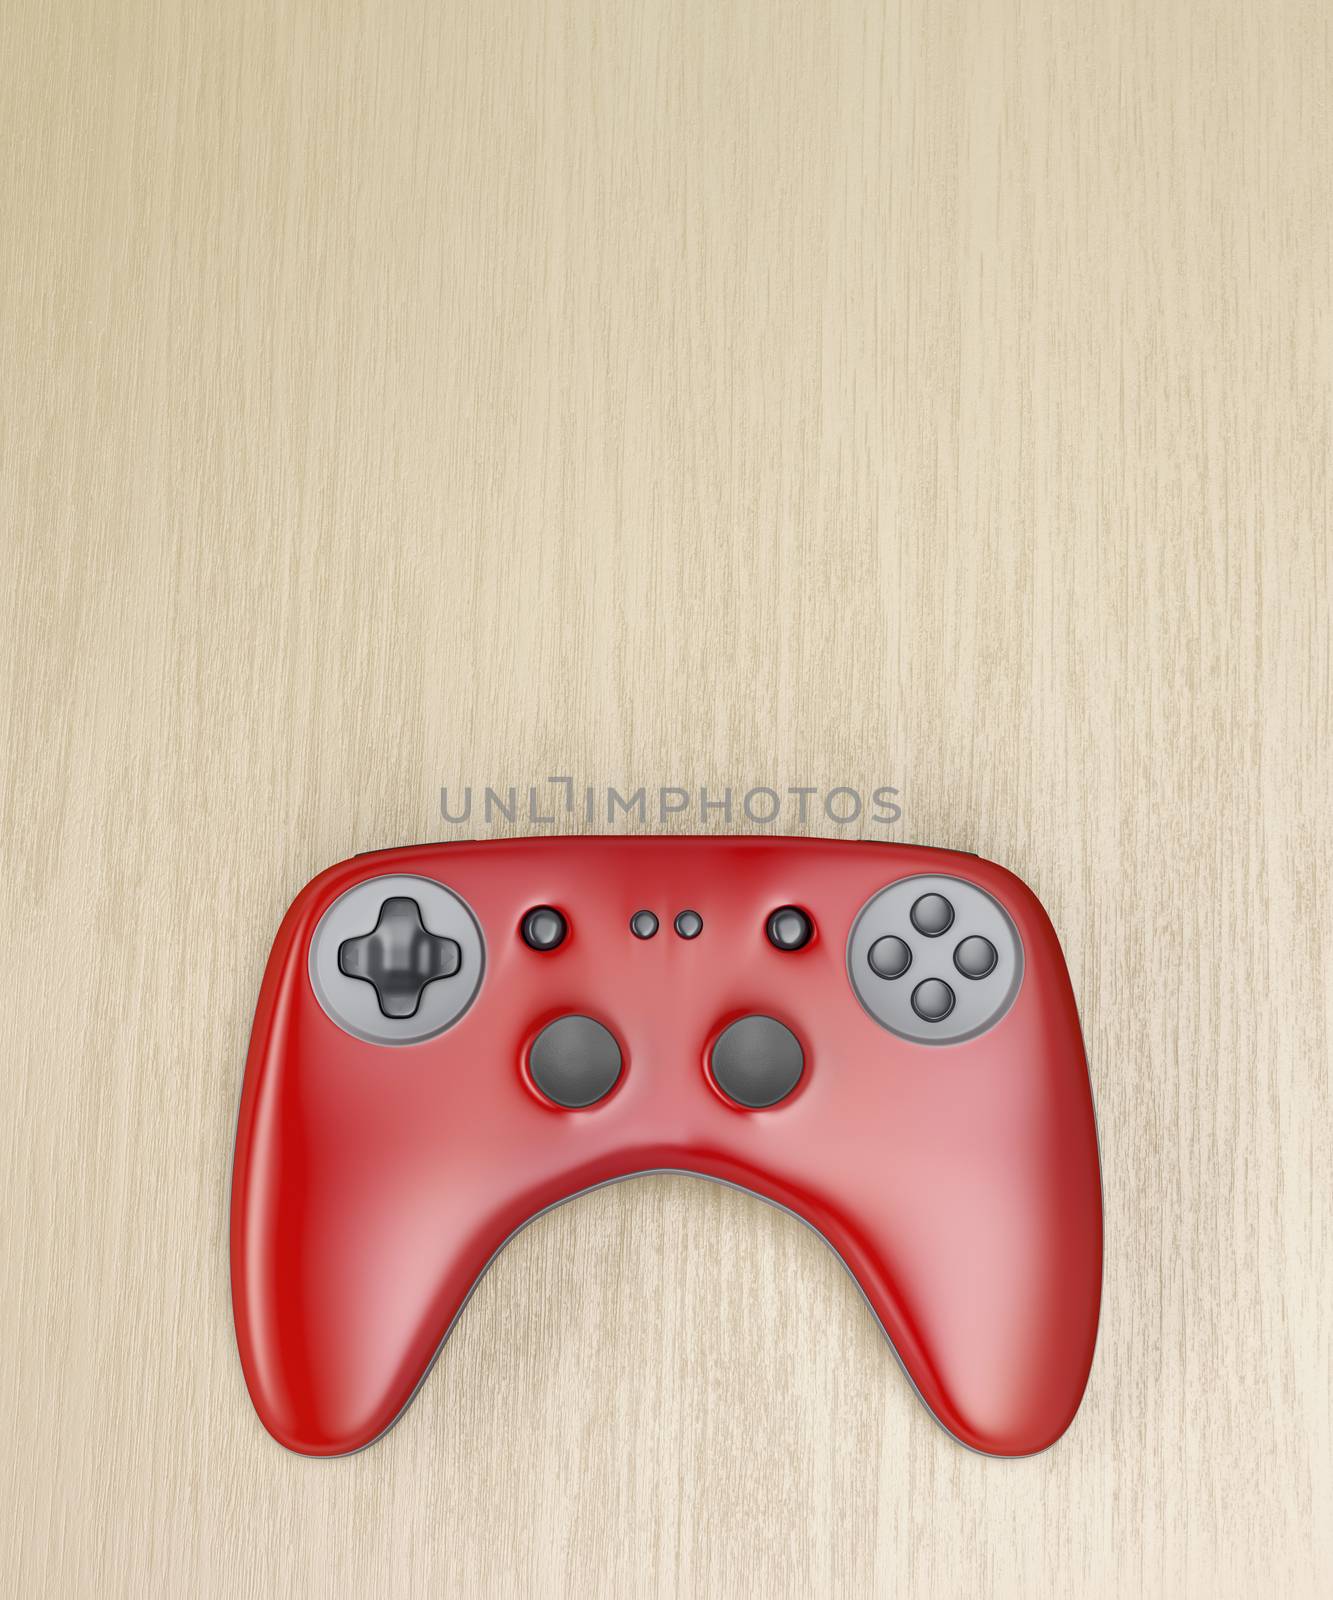 Red wireless gamepad on wooden desk, top view